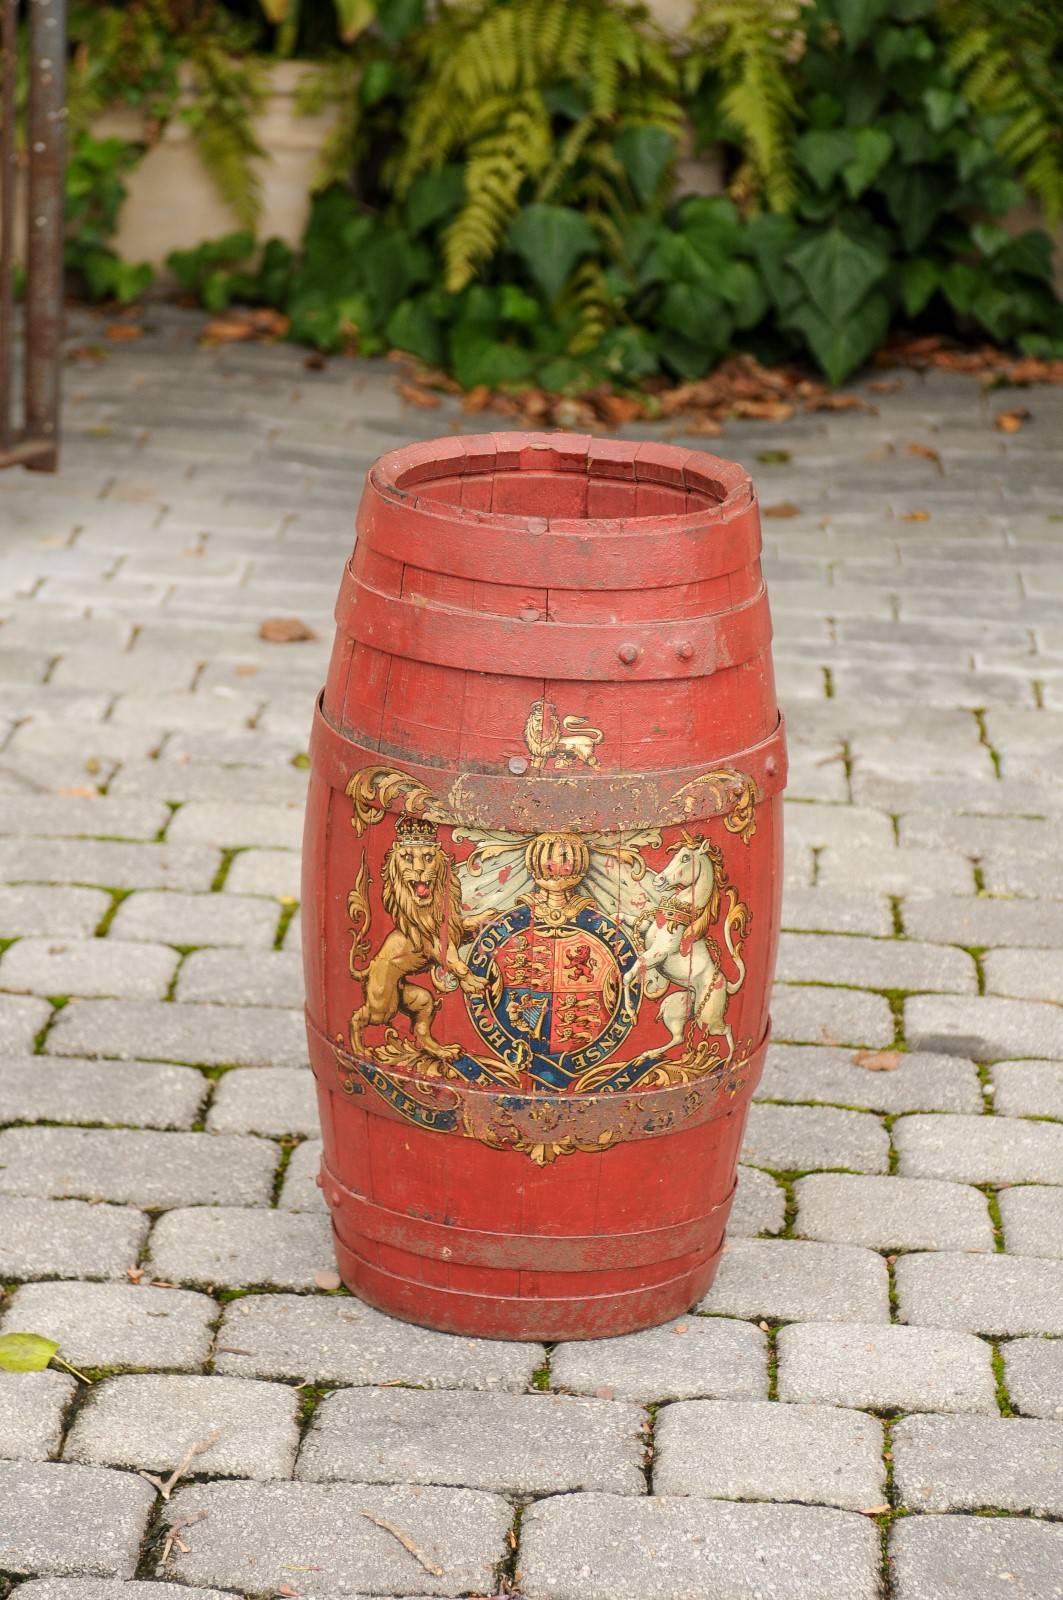 An English red painted wooden barrel umbrella stand with royal coat of arm from the early 20th century. This English barrel features a slender wooden body with iron straps, all painted in red. The front is adorned with the royal coat of arms made of